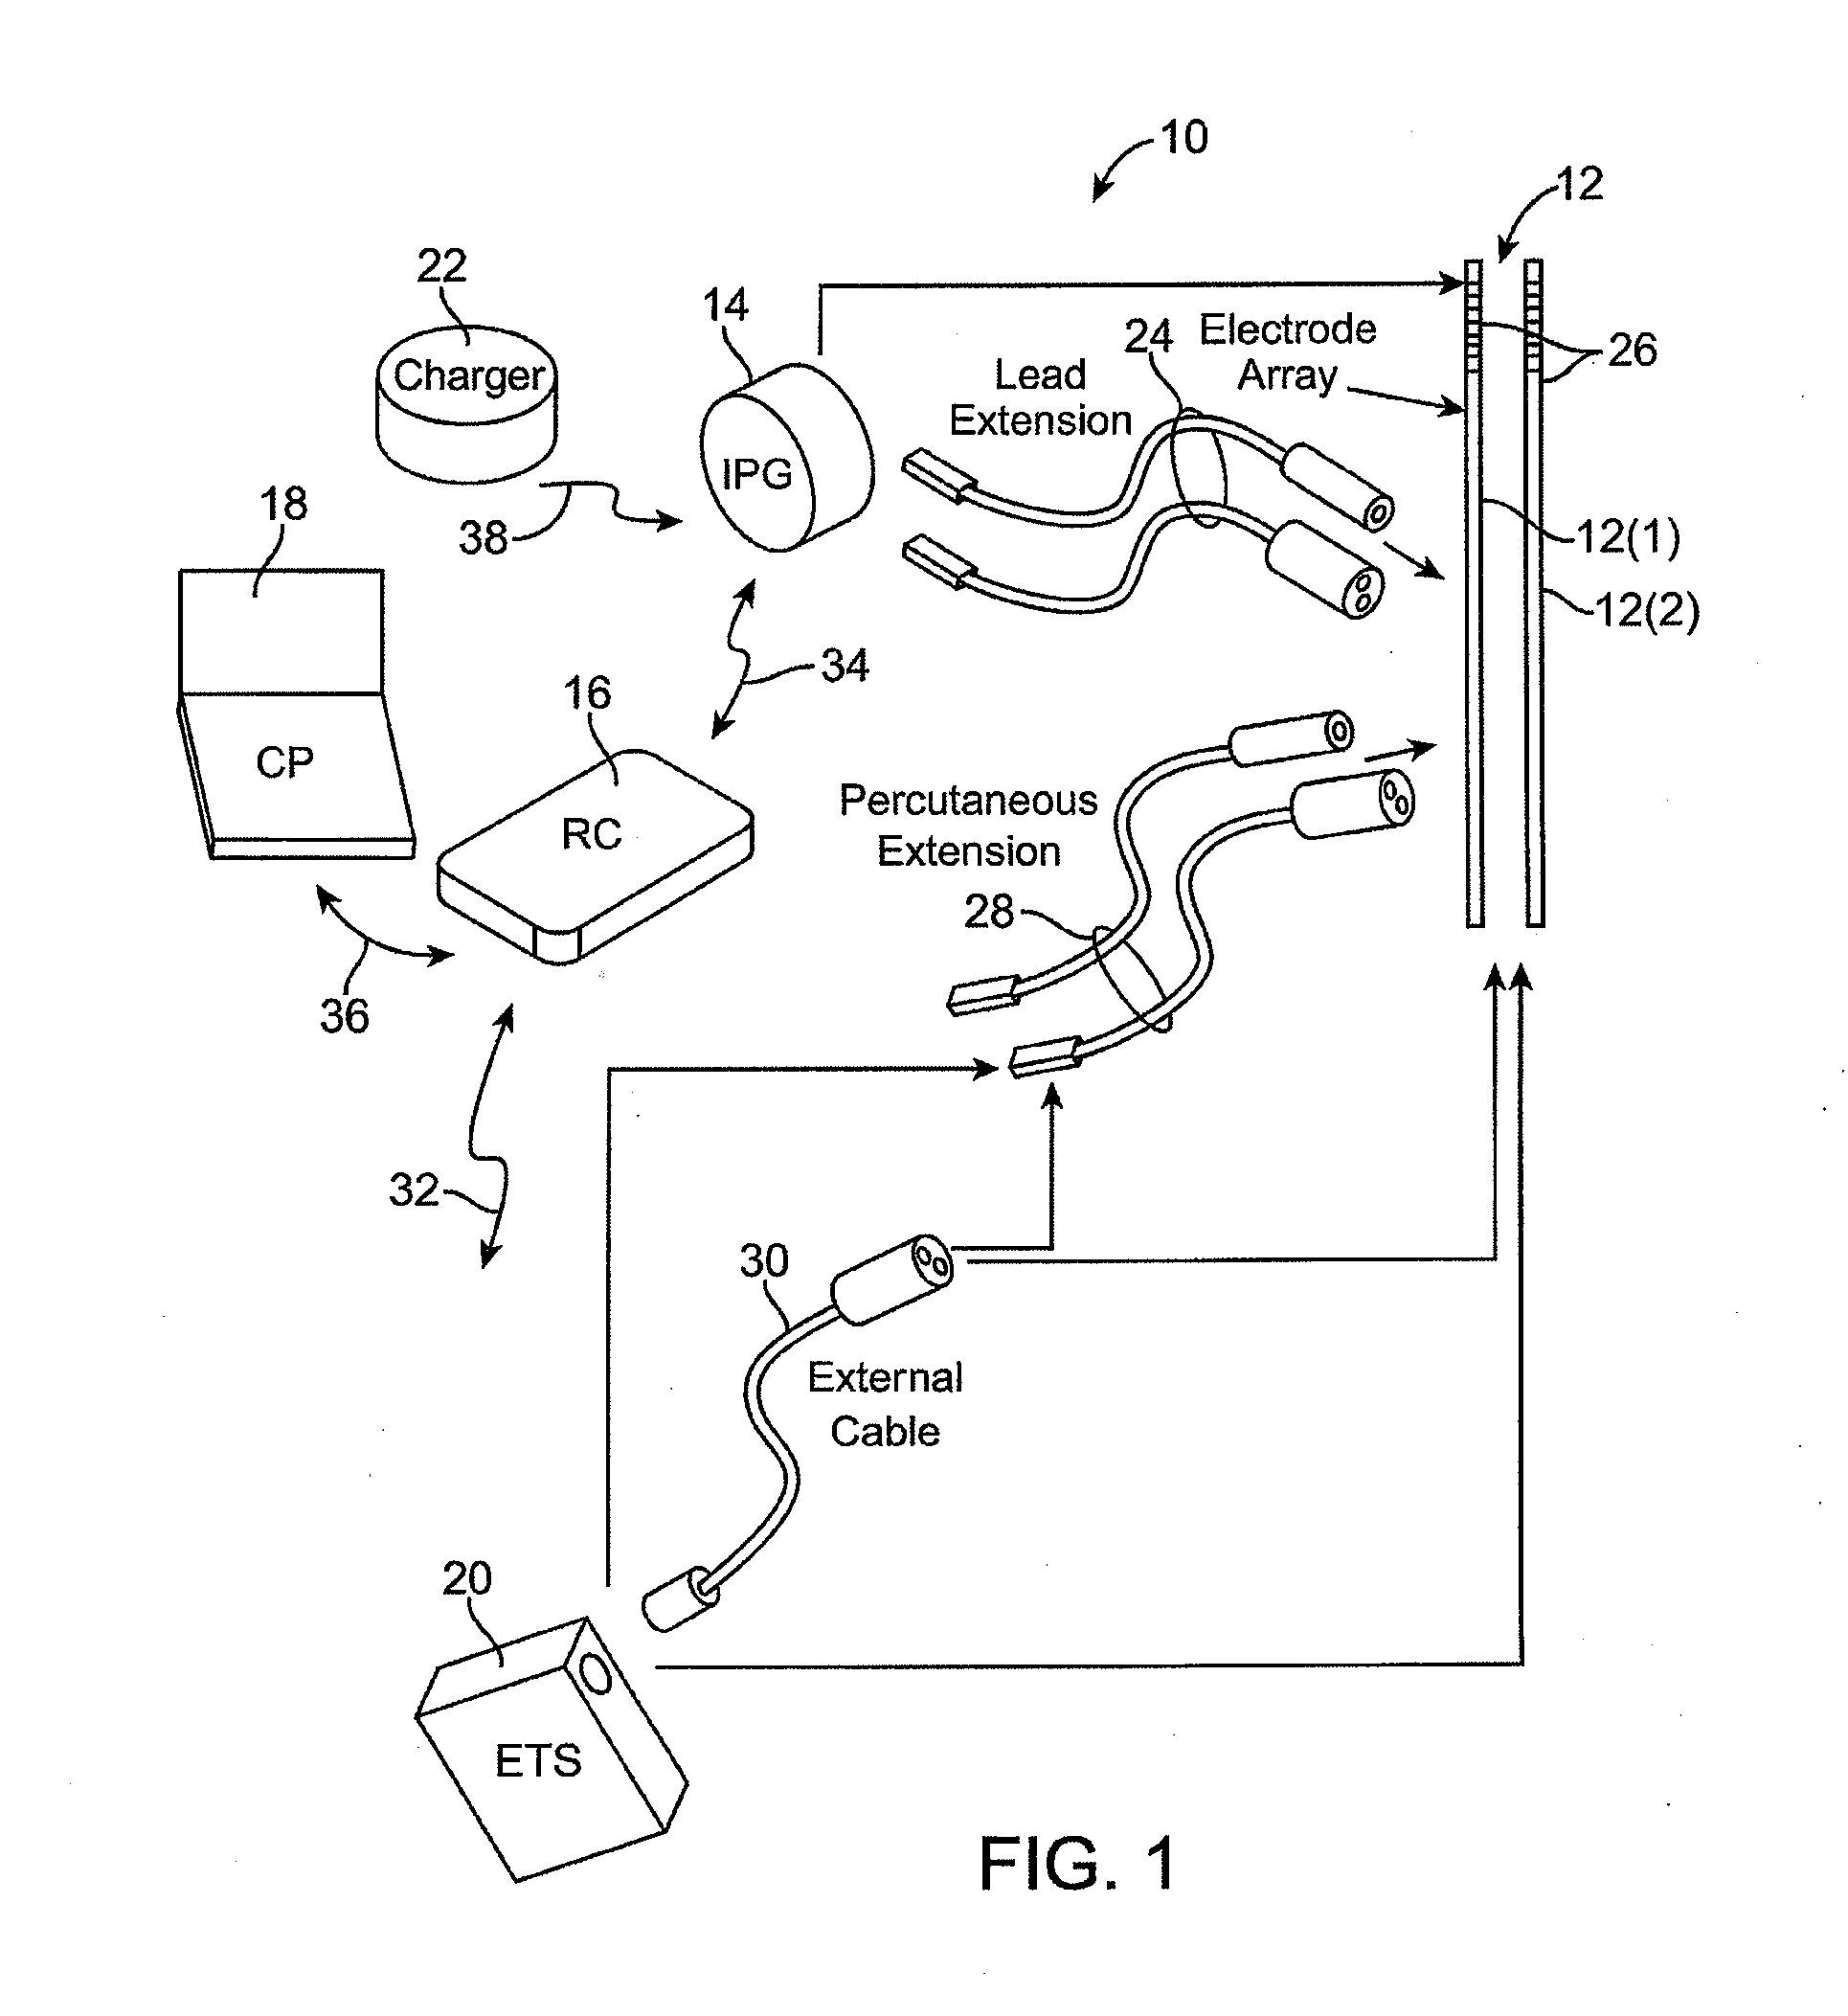 System and method for estimating lead configuration from neighboring relationship between electrodes